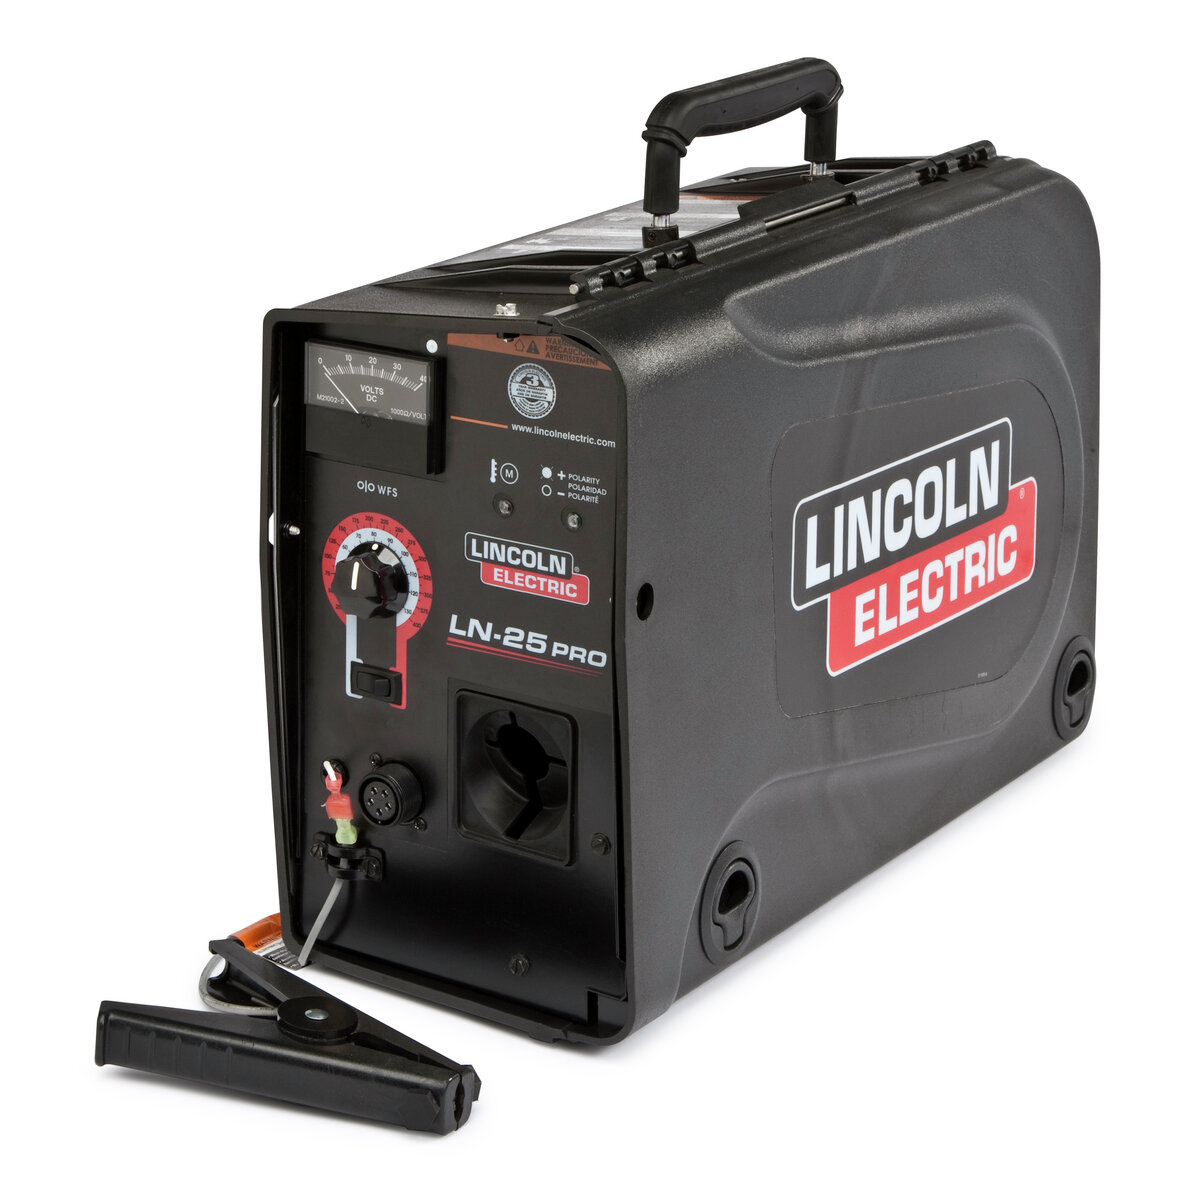 Airgas - LINK2613-5 - Lincoln Electric® LN-25® PRO® Wire Feeder